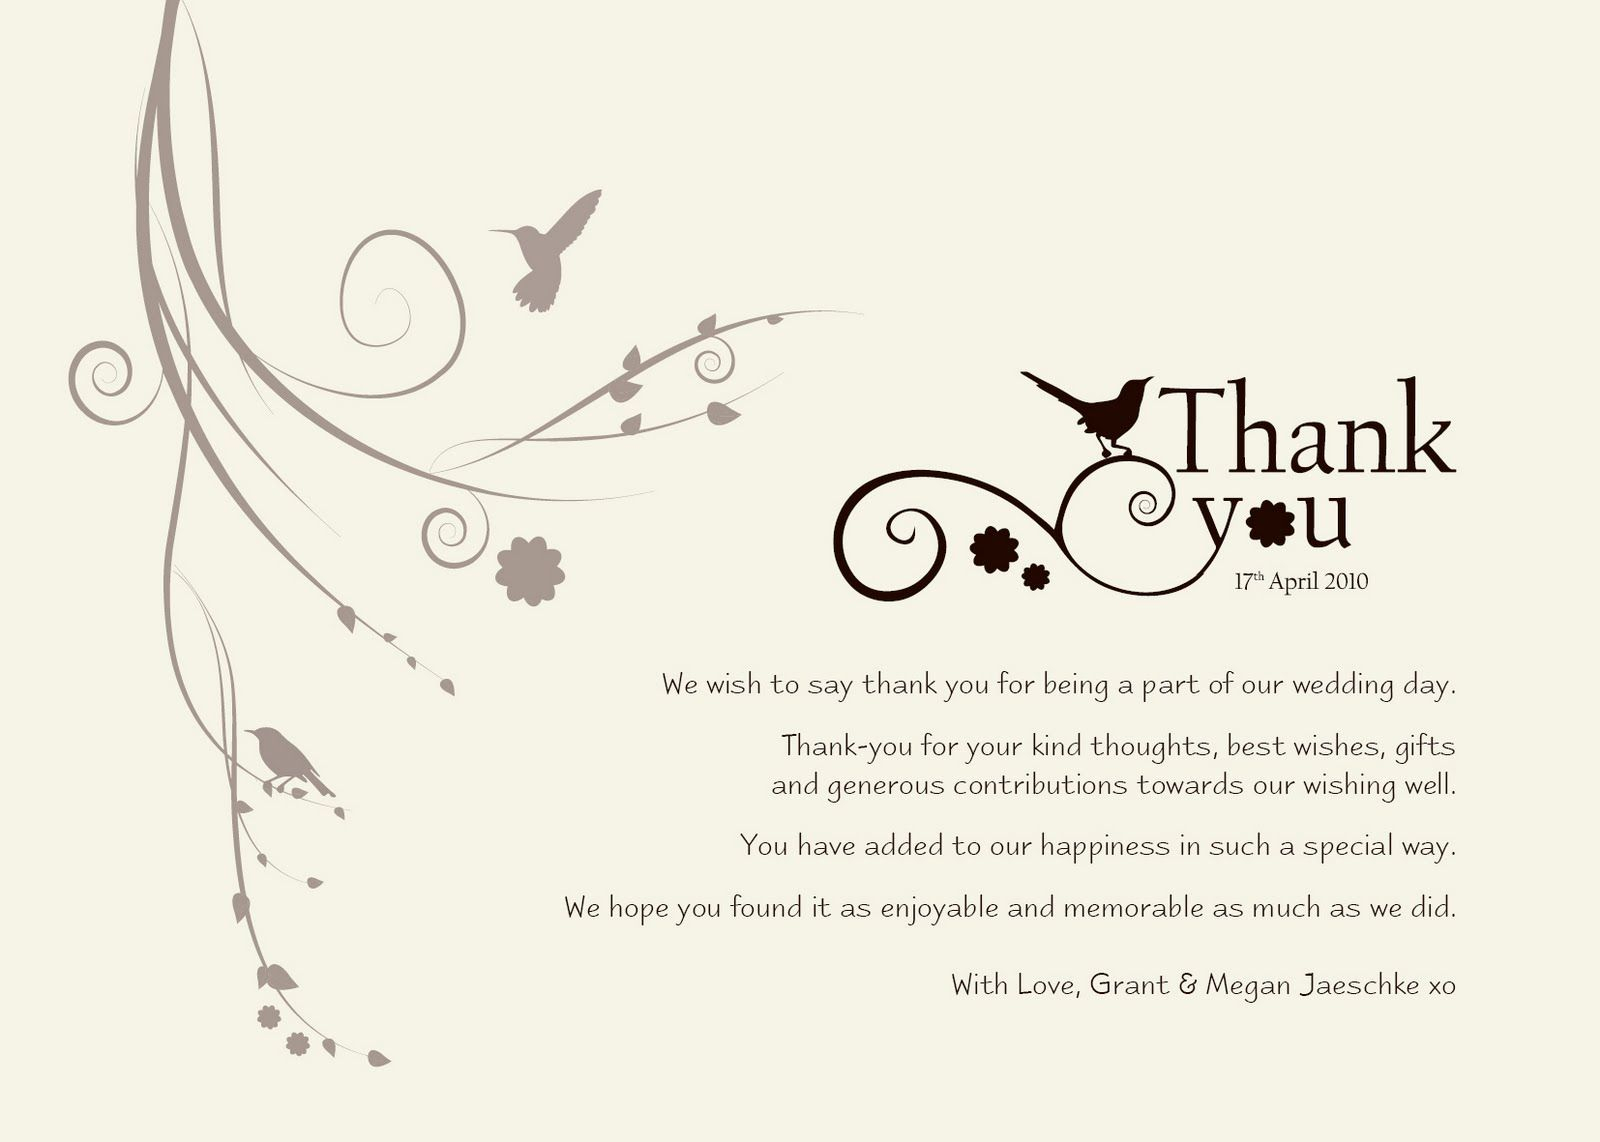 020 Wedding Thank You Card Template Magnificent Ideas Free With Regard To Template For Wedding Thank You Cards